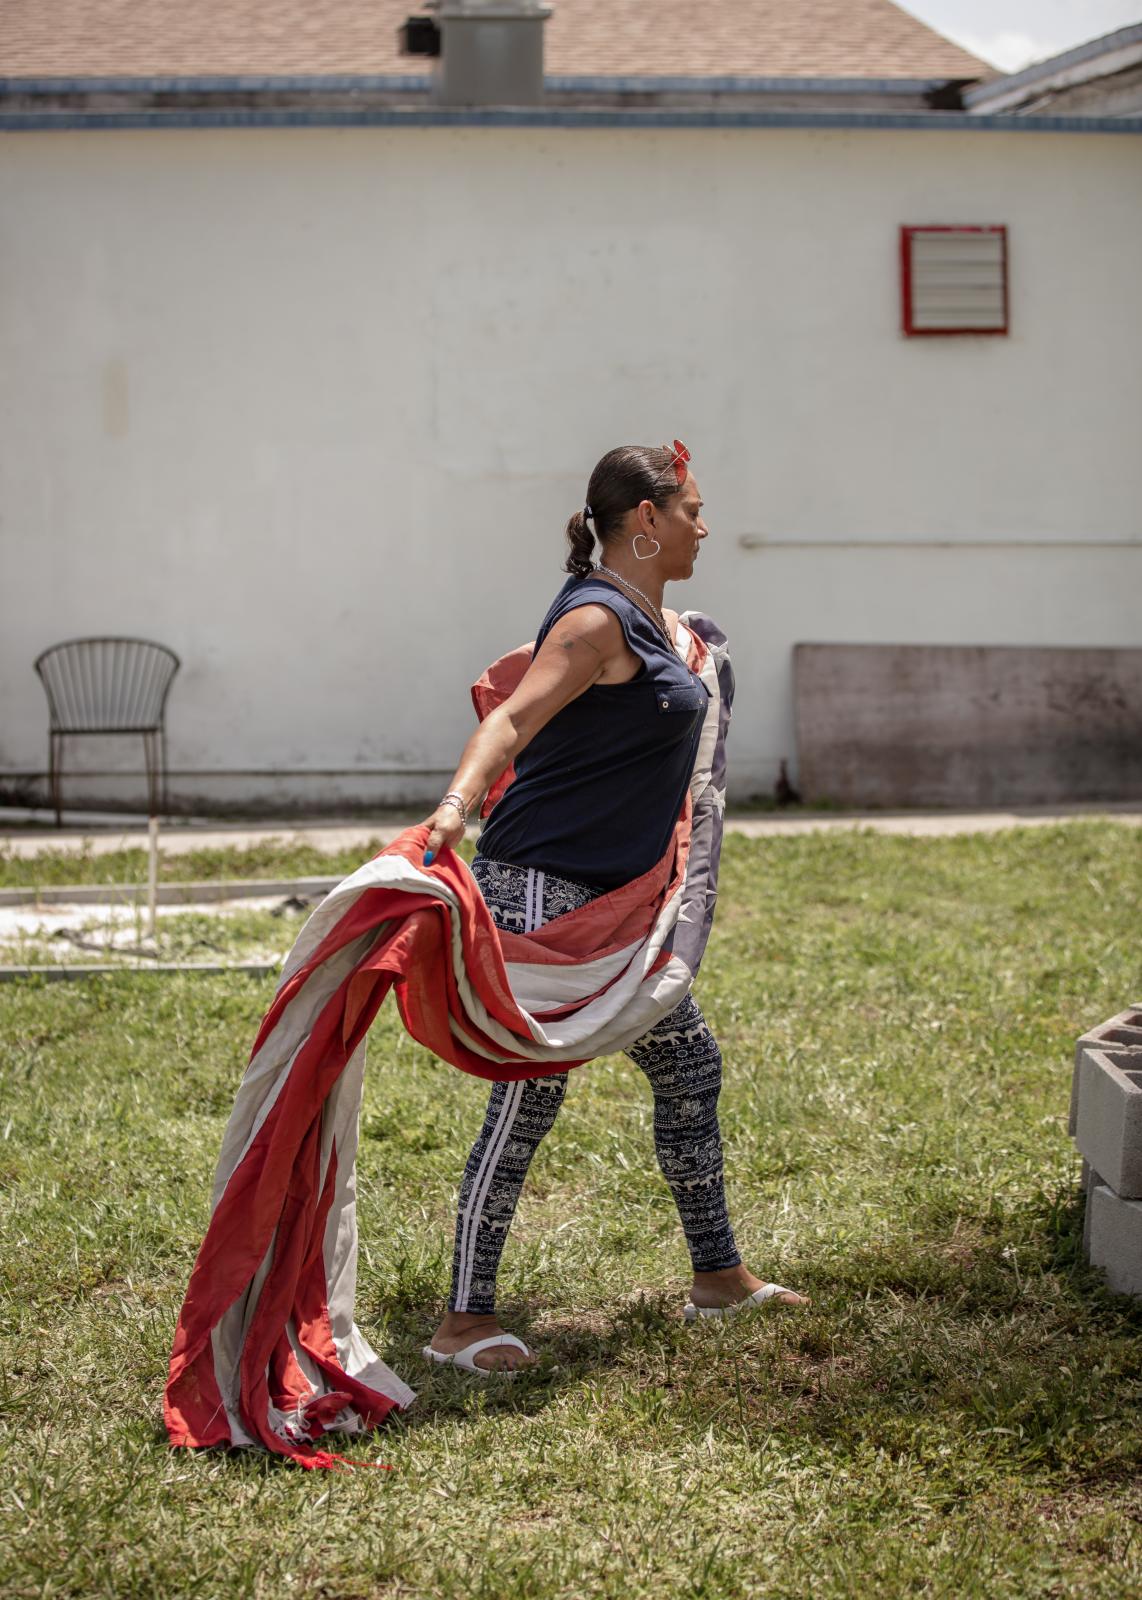 Post 67: American Legion, American Stories - Elaine Salazar, a former post bartender, carries an oversized American flag larger to the fire...